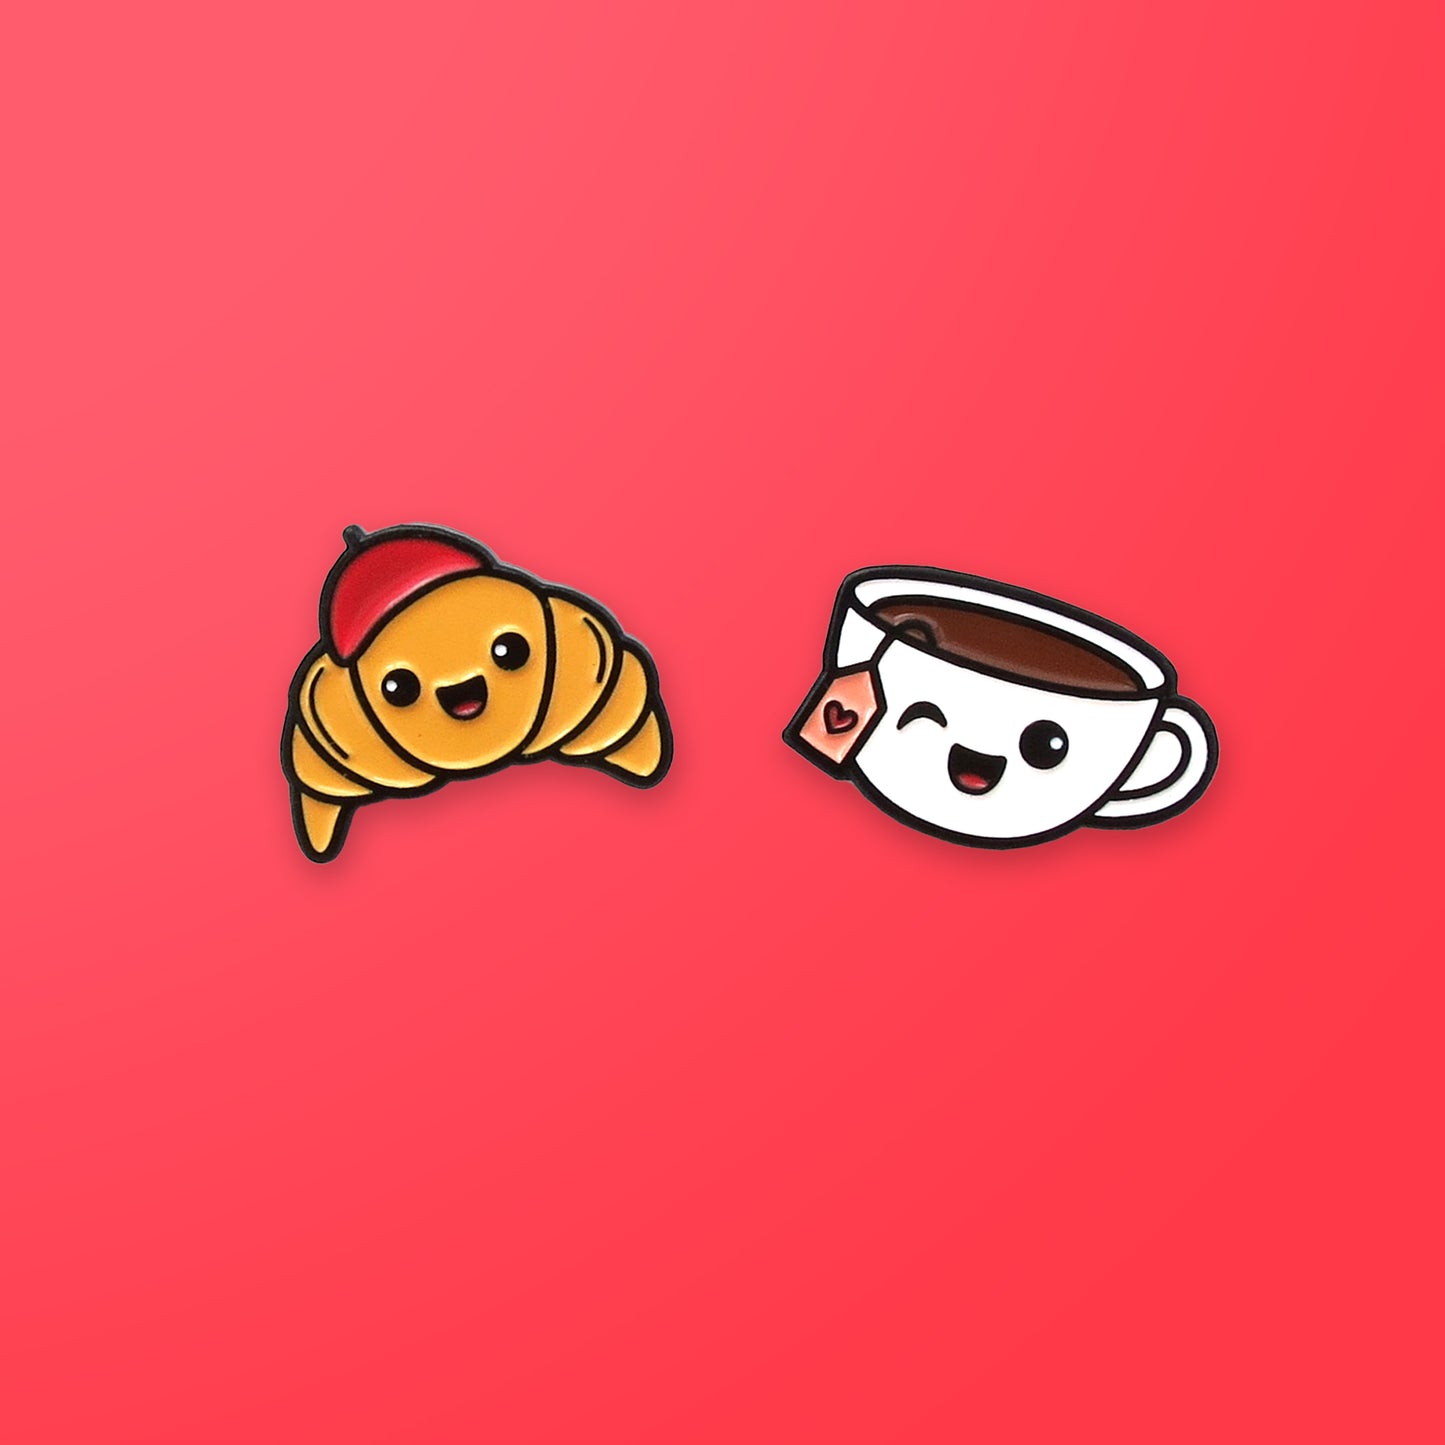 Croissant and Tea enamel pin set on red background